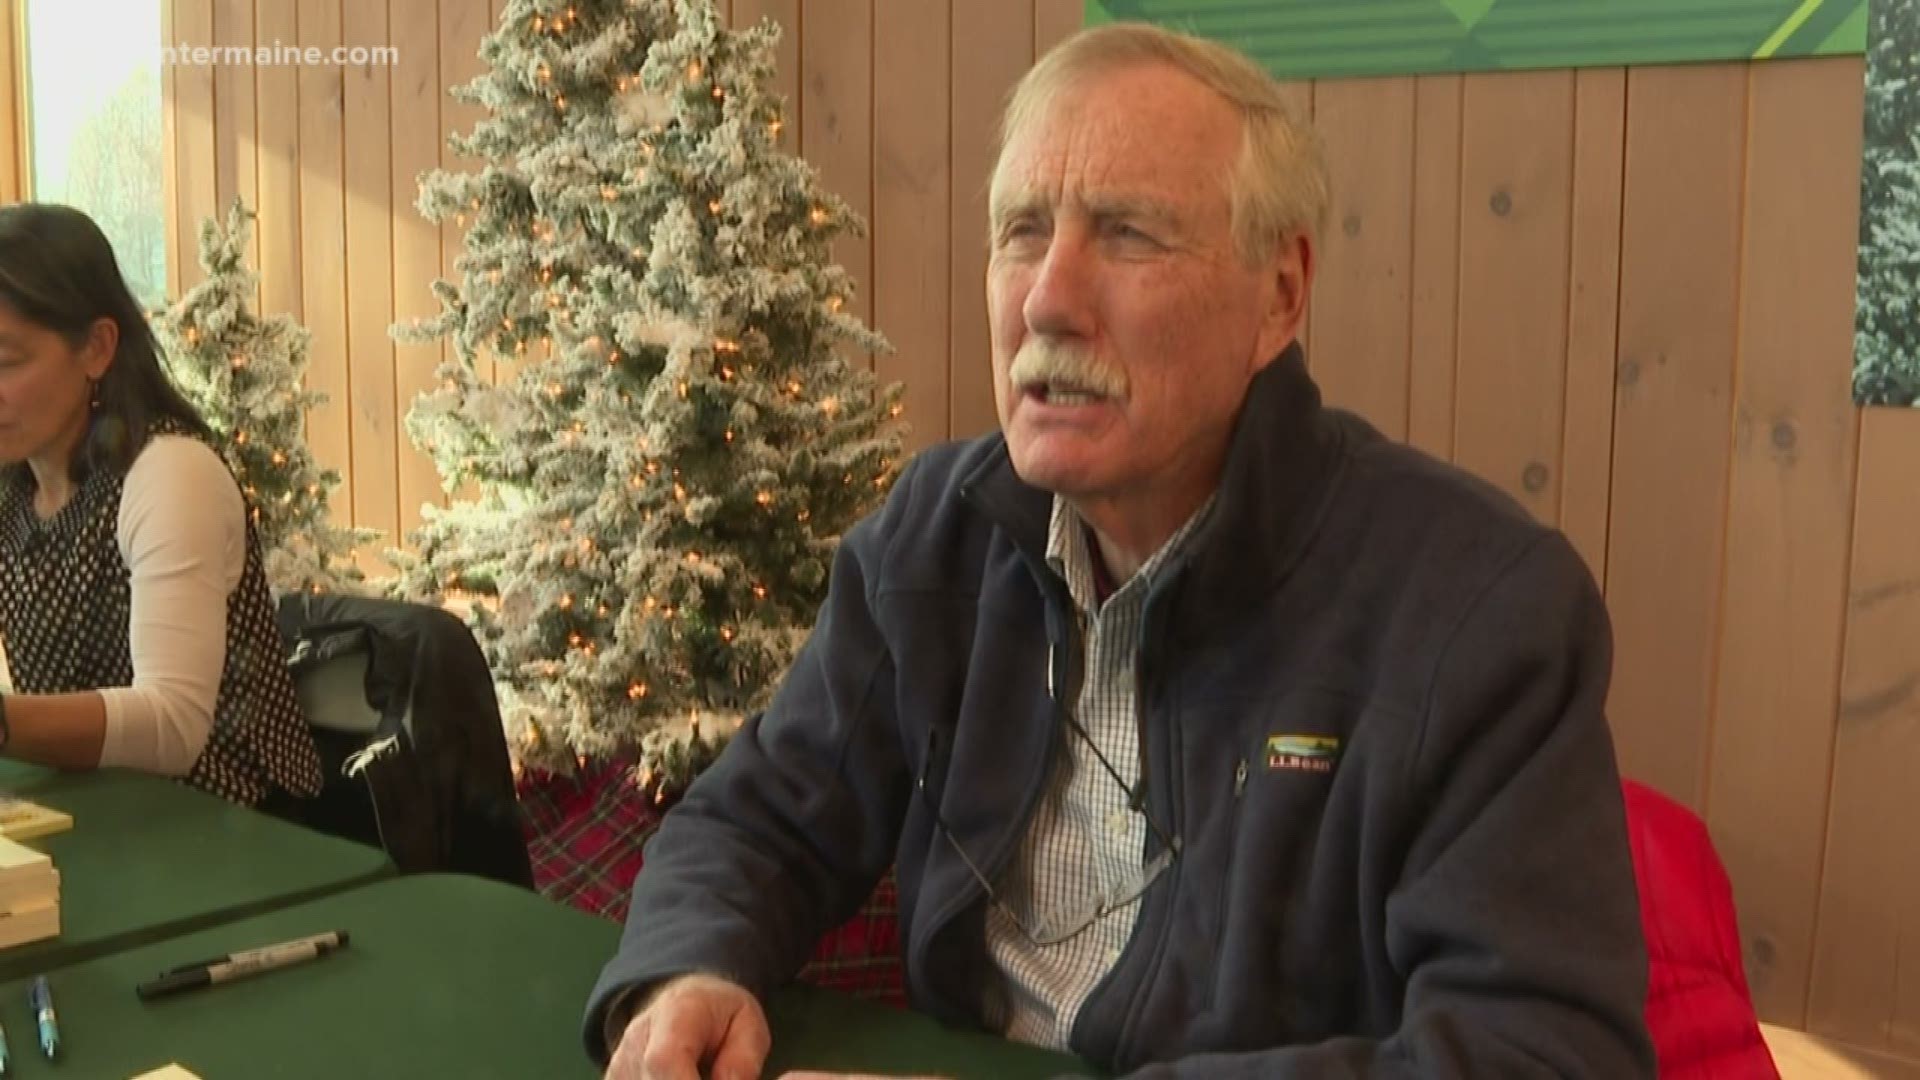 Angus King at L.L. Bean on his new book and healthcare ruling.